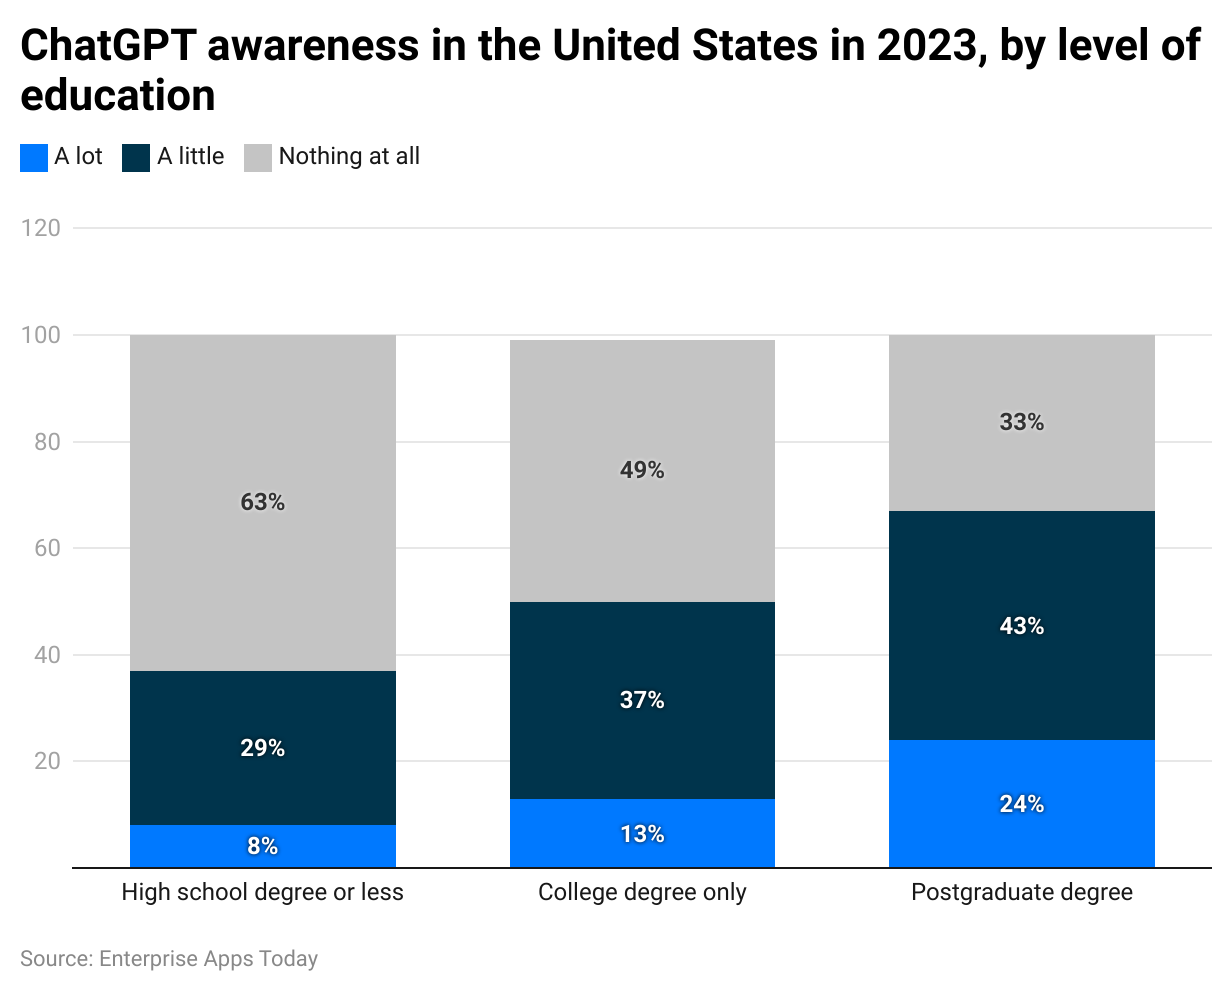 chatgpt-awareness-in-the-united-states-in-2023-by-level-of-education.